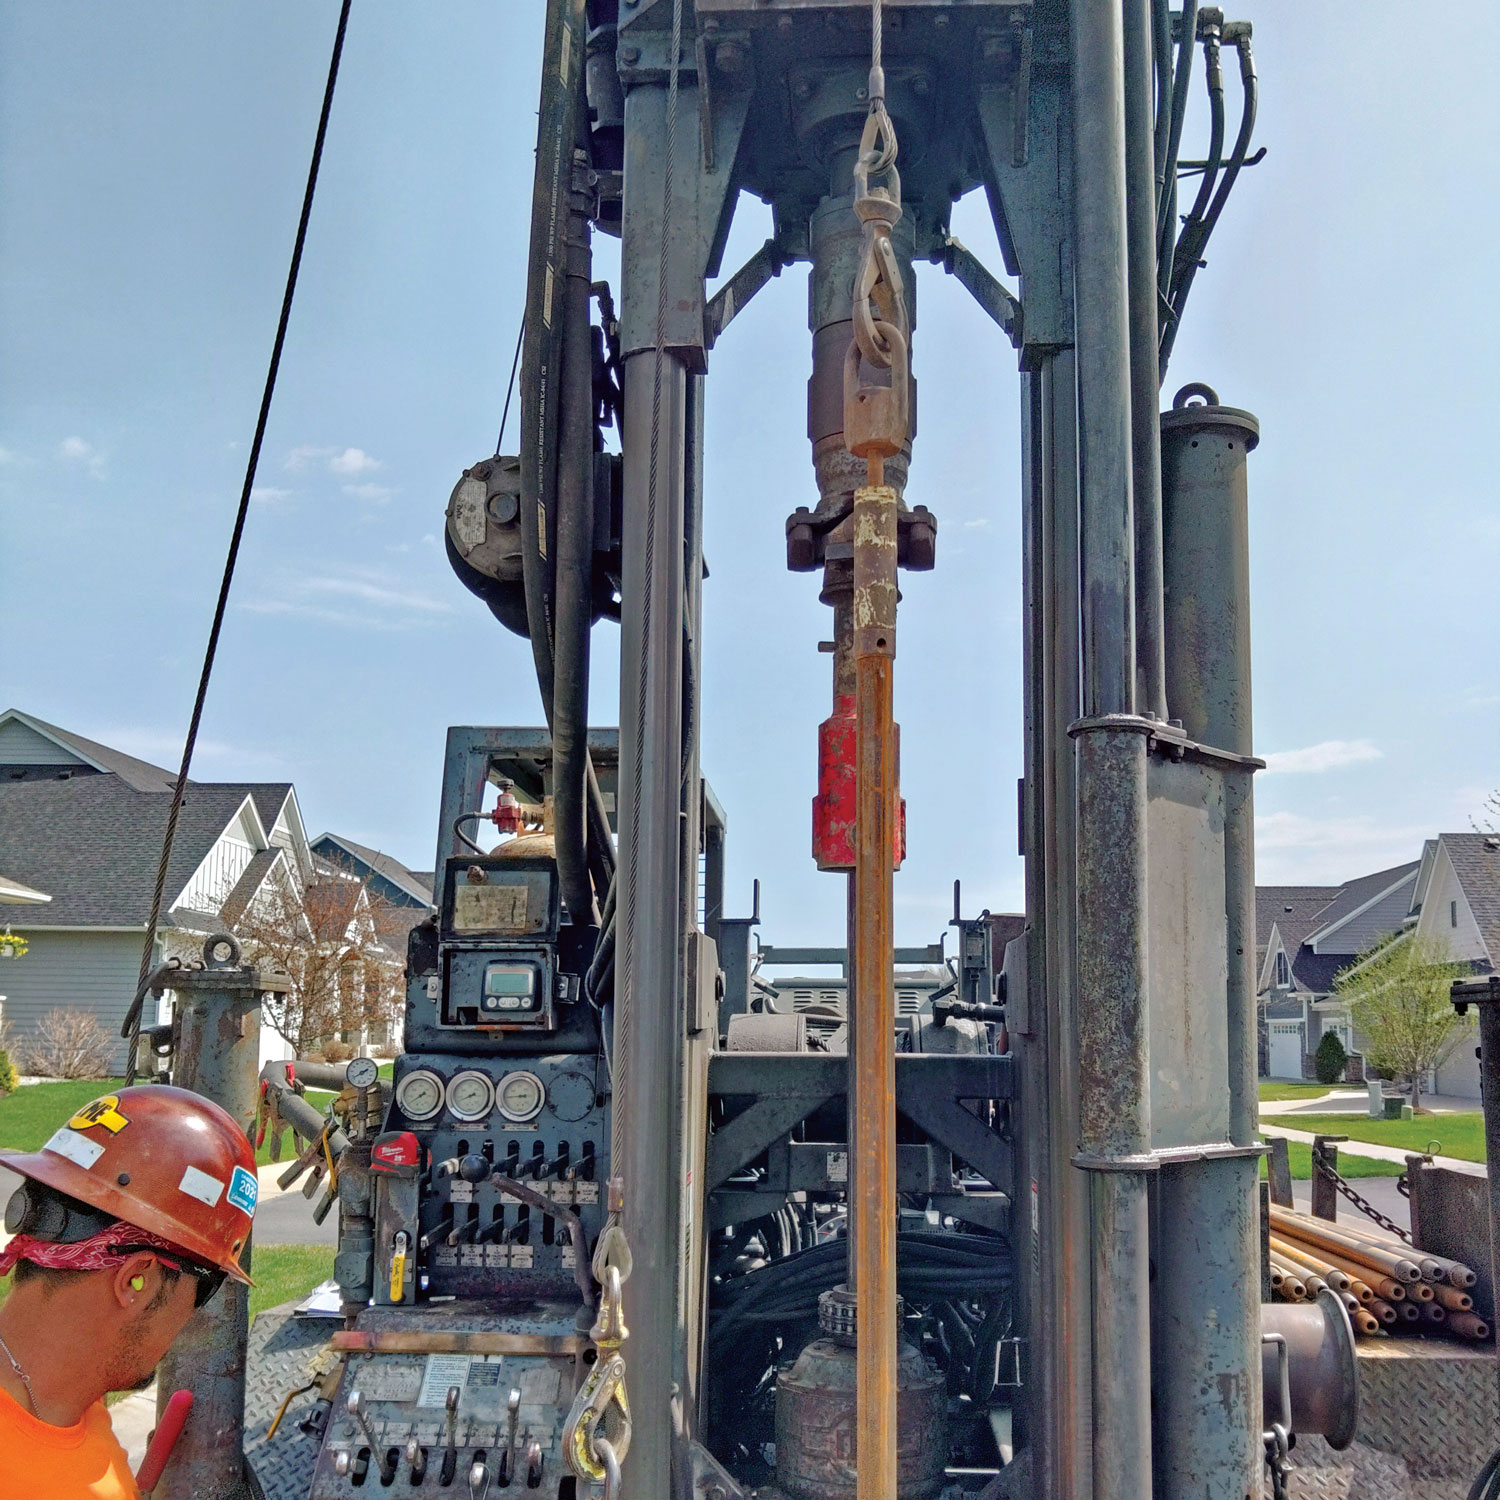 Drillers operating conventionall drill rig like the benefits of the spring assisted swivel lift cap, making their work easier and improving drilling safety.. 